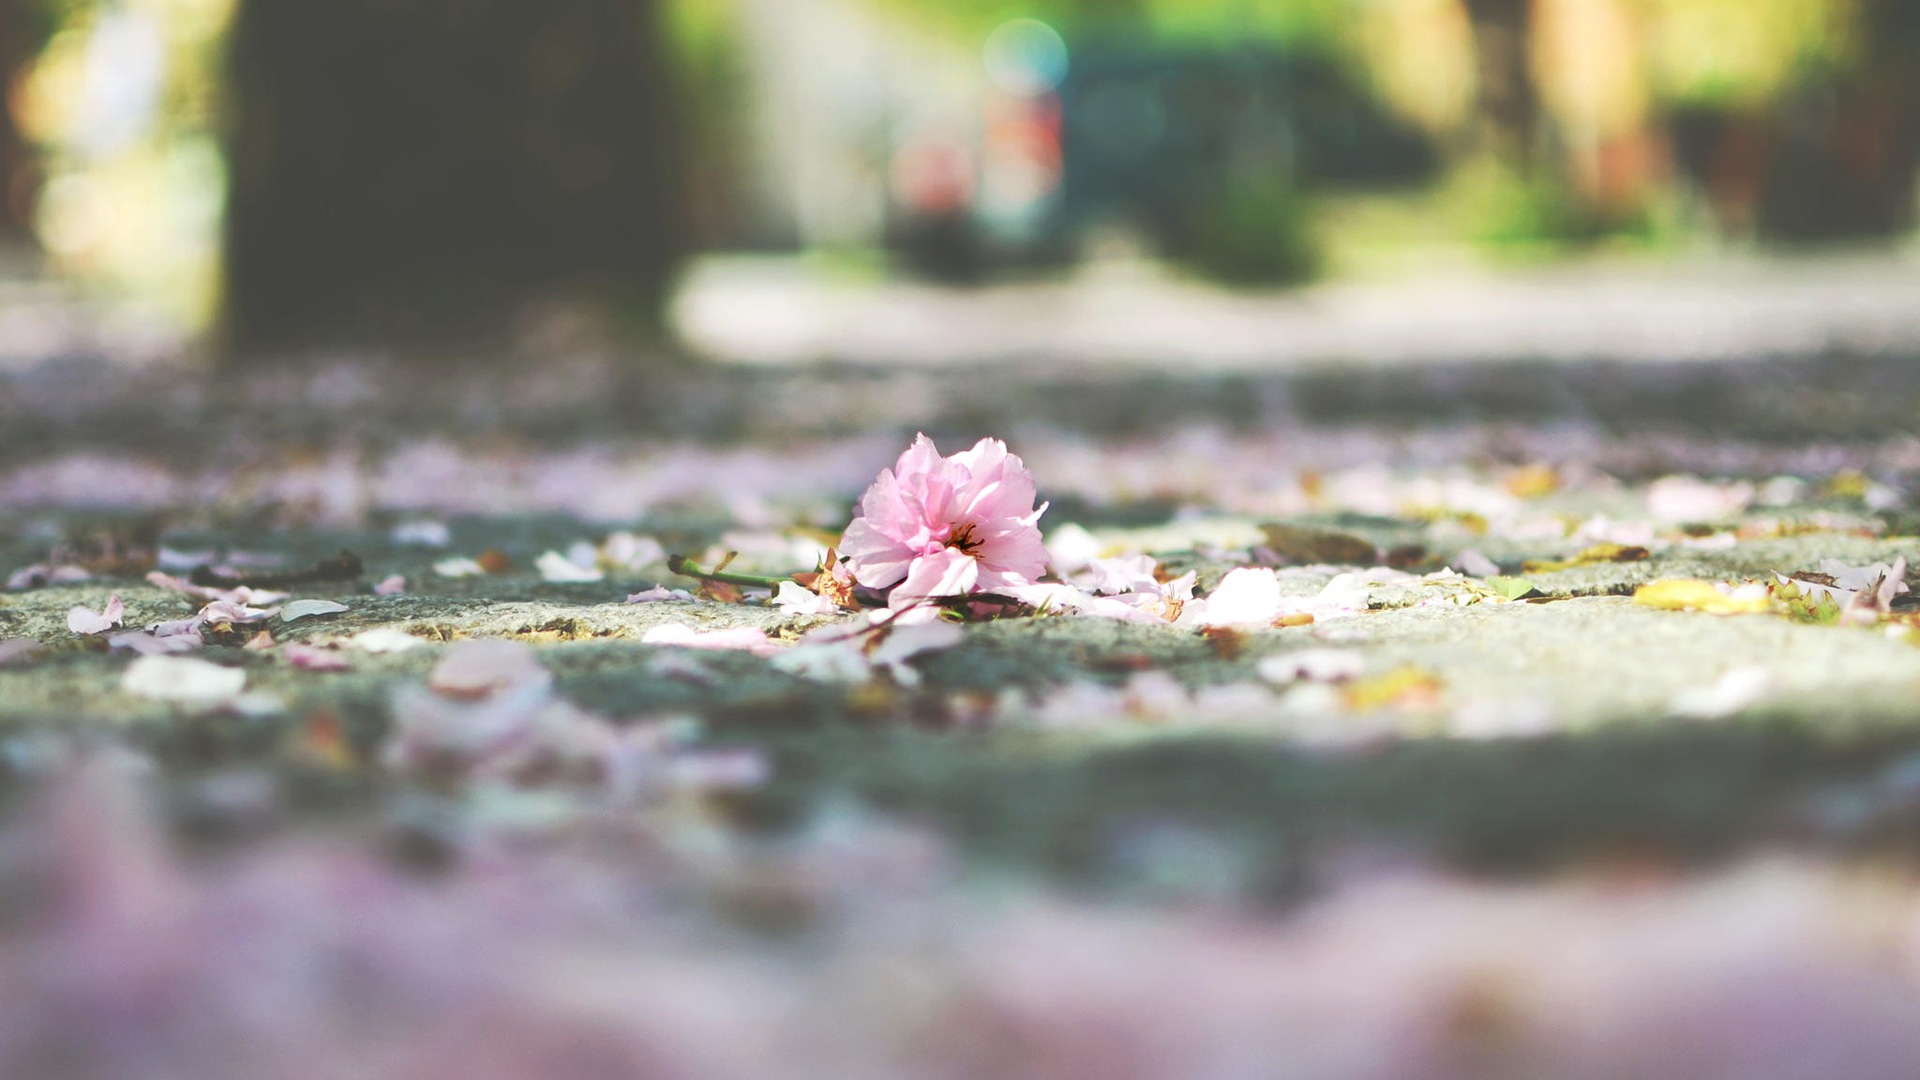 Flowers fall on ground, beautiful HD wallpapers #9 - 1920x1080